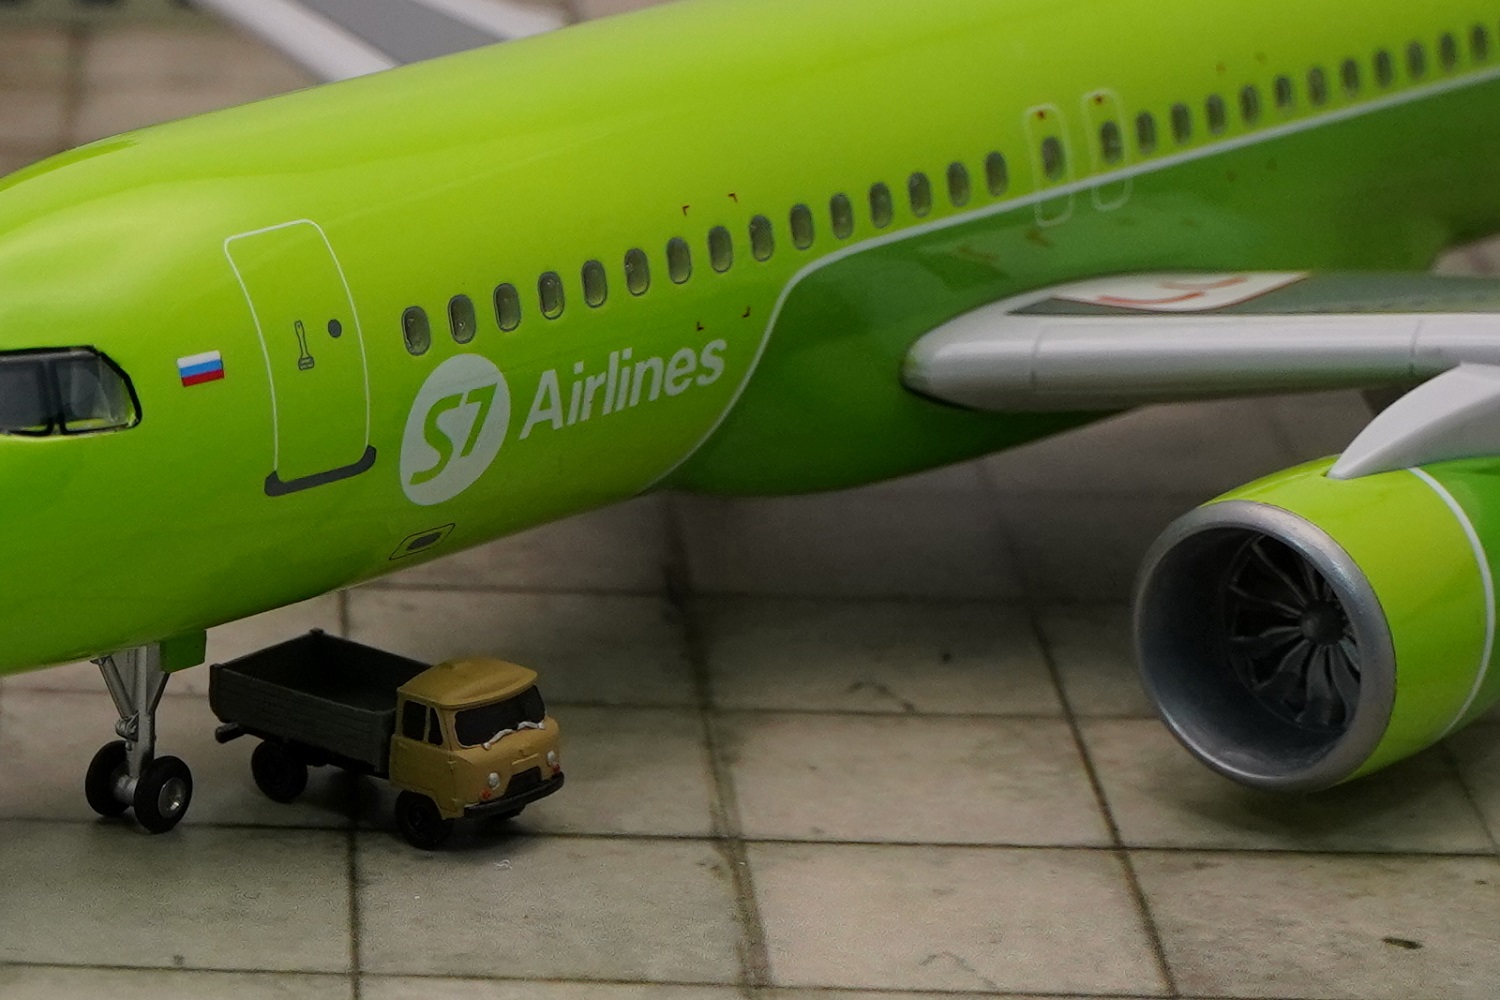   Airbus A320 Neo,  S7 Airlines .    .  # 14 hobbyplus.ru